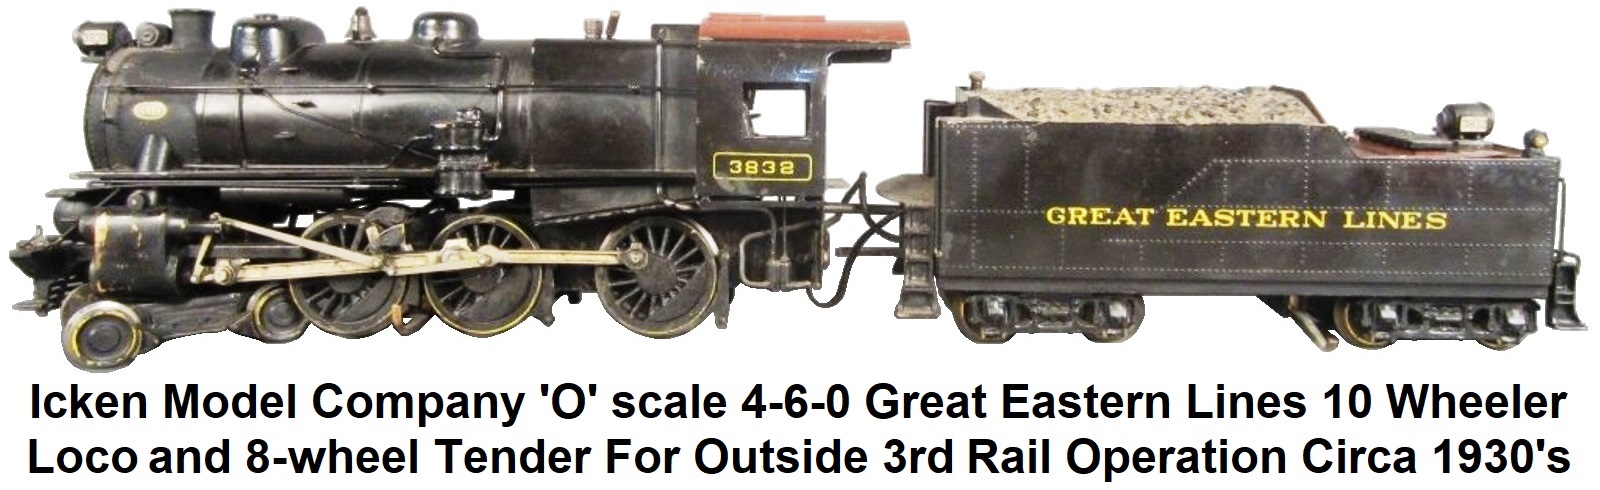 Icken 'O' scale 4-6-0 Great Eastern Lines Ten Wheeler loco & tender for outside 3rd rail operation circa 1930's